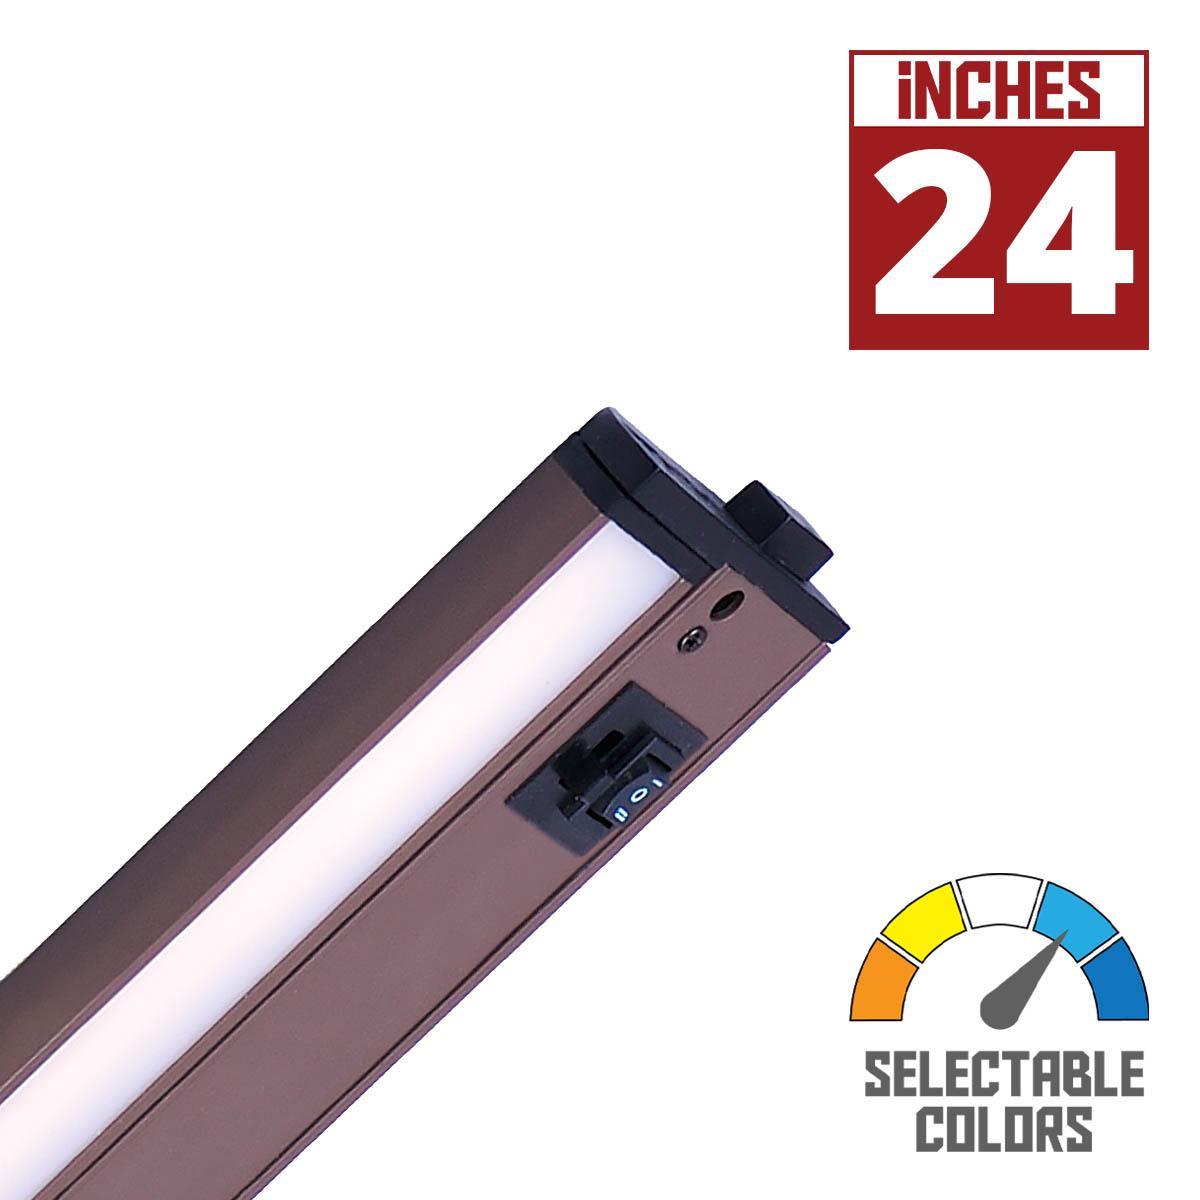 CounterMax 5K 24 Inch Under Cabinet LED Light with Patent gimbals, 1560 Lumens, Linkable, CCT Selectable 2700K to 5000K, 120V - Bees Lighting